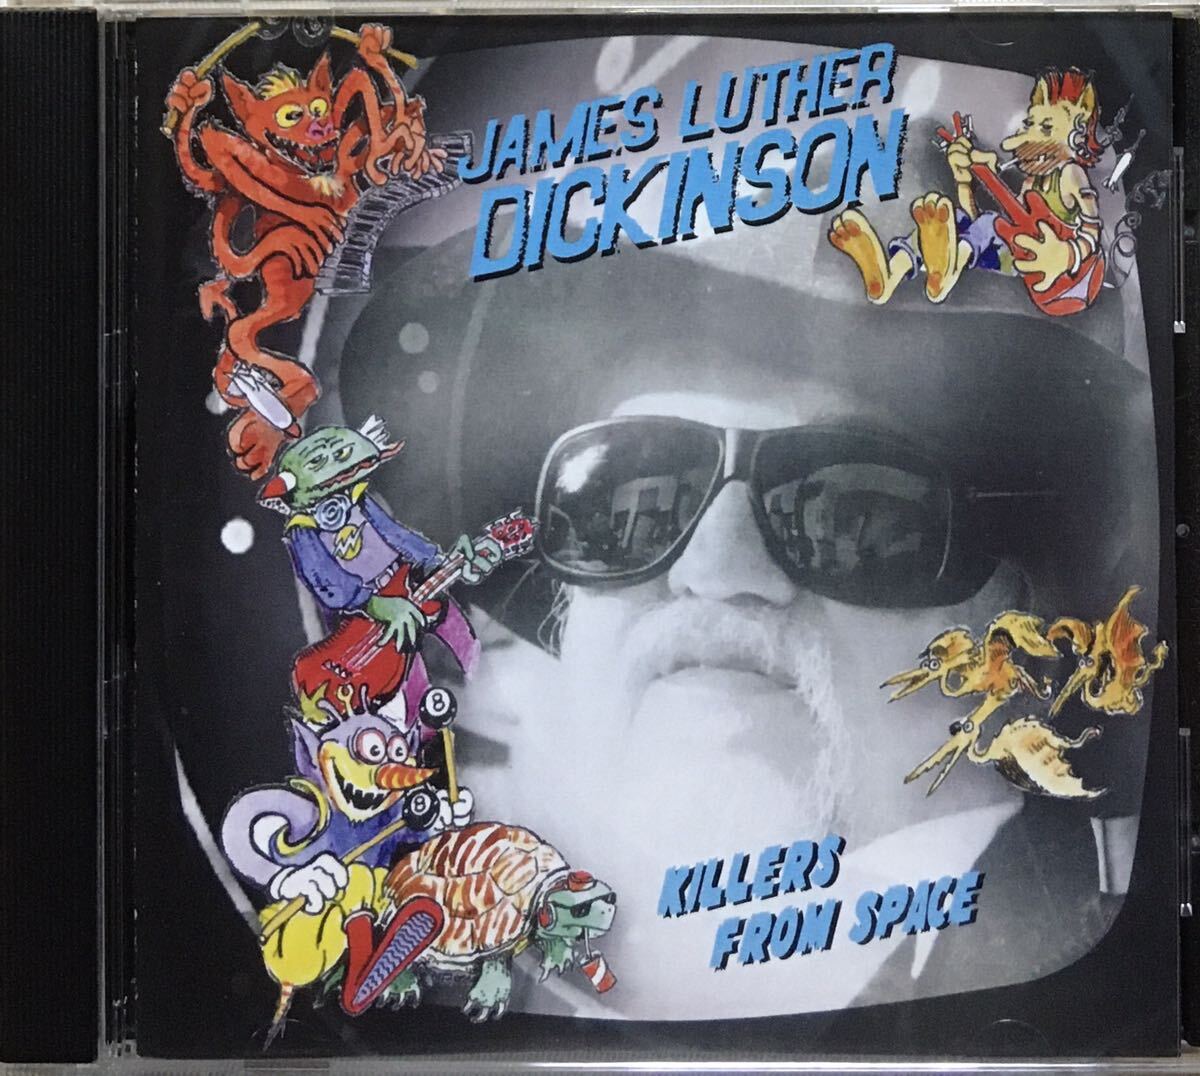 Jim Dickinson[Killers from Space]2007年大名盤！ブルースロック/スワンプ/サザンロック/North Mississippi Allstars/Shannon McNallyの画像1